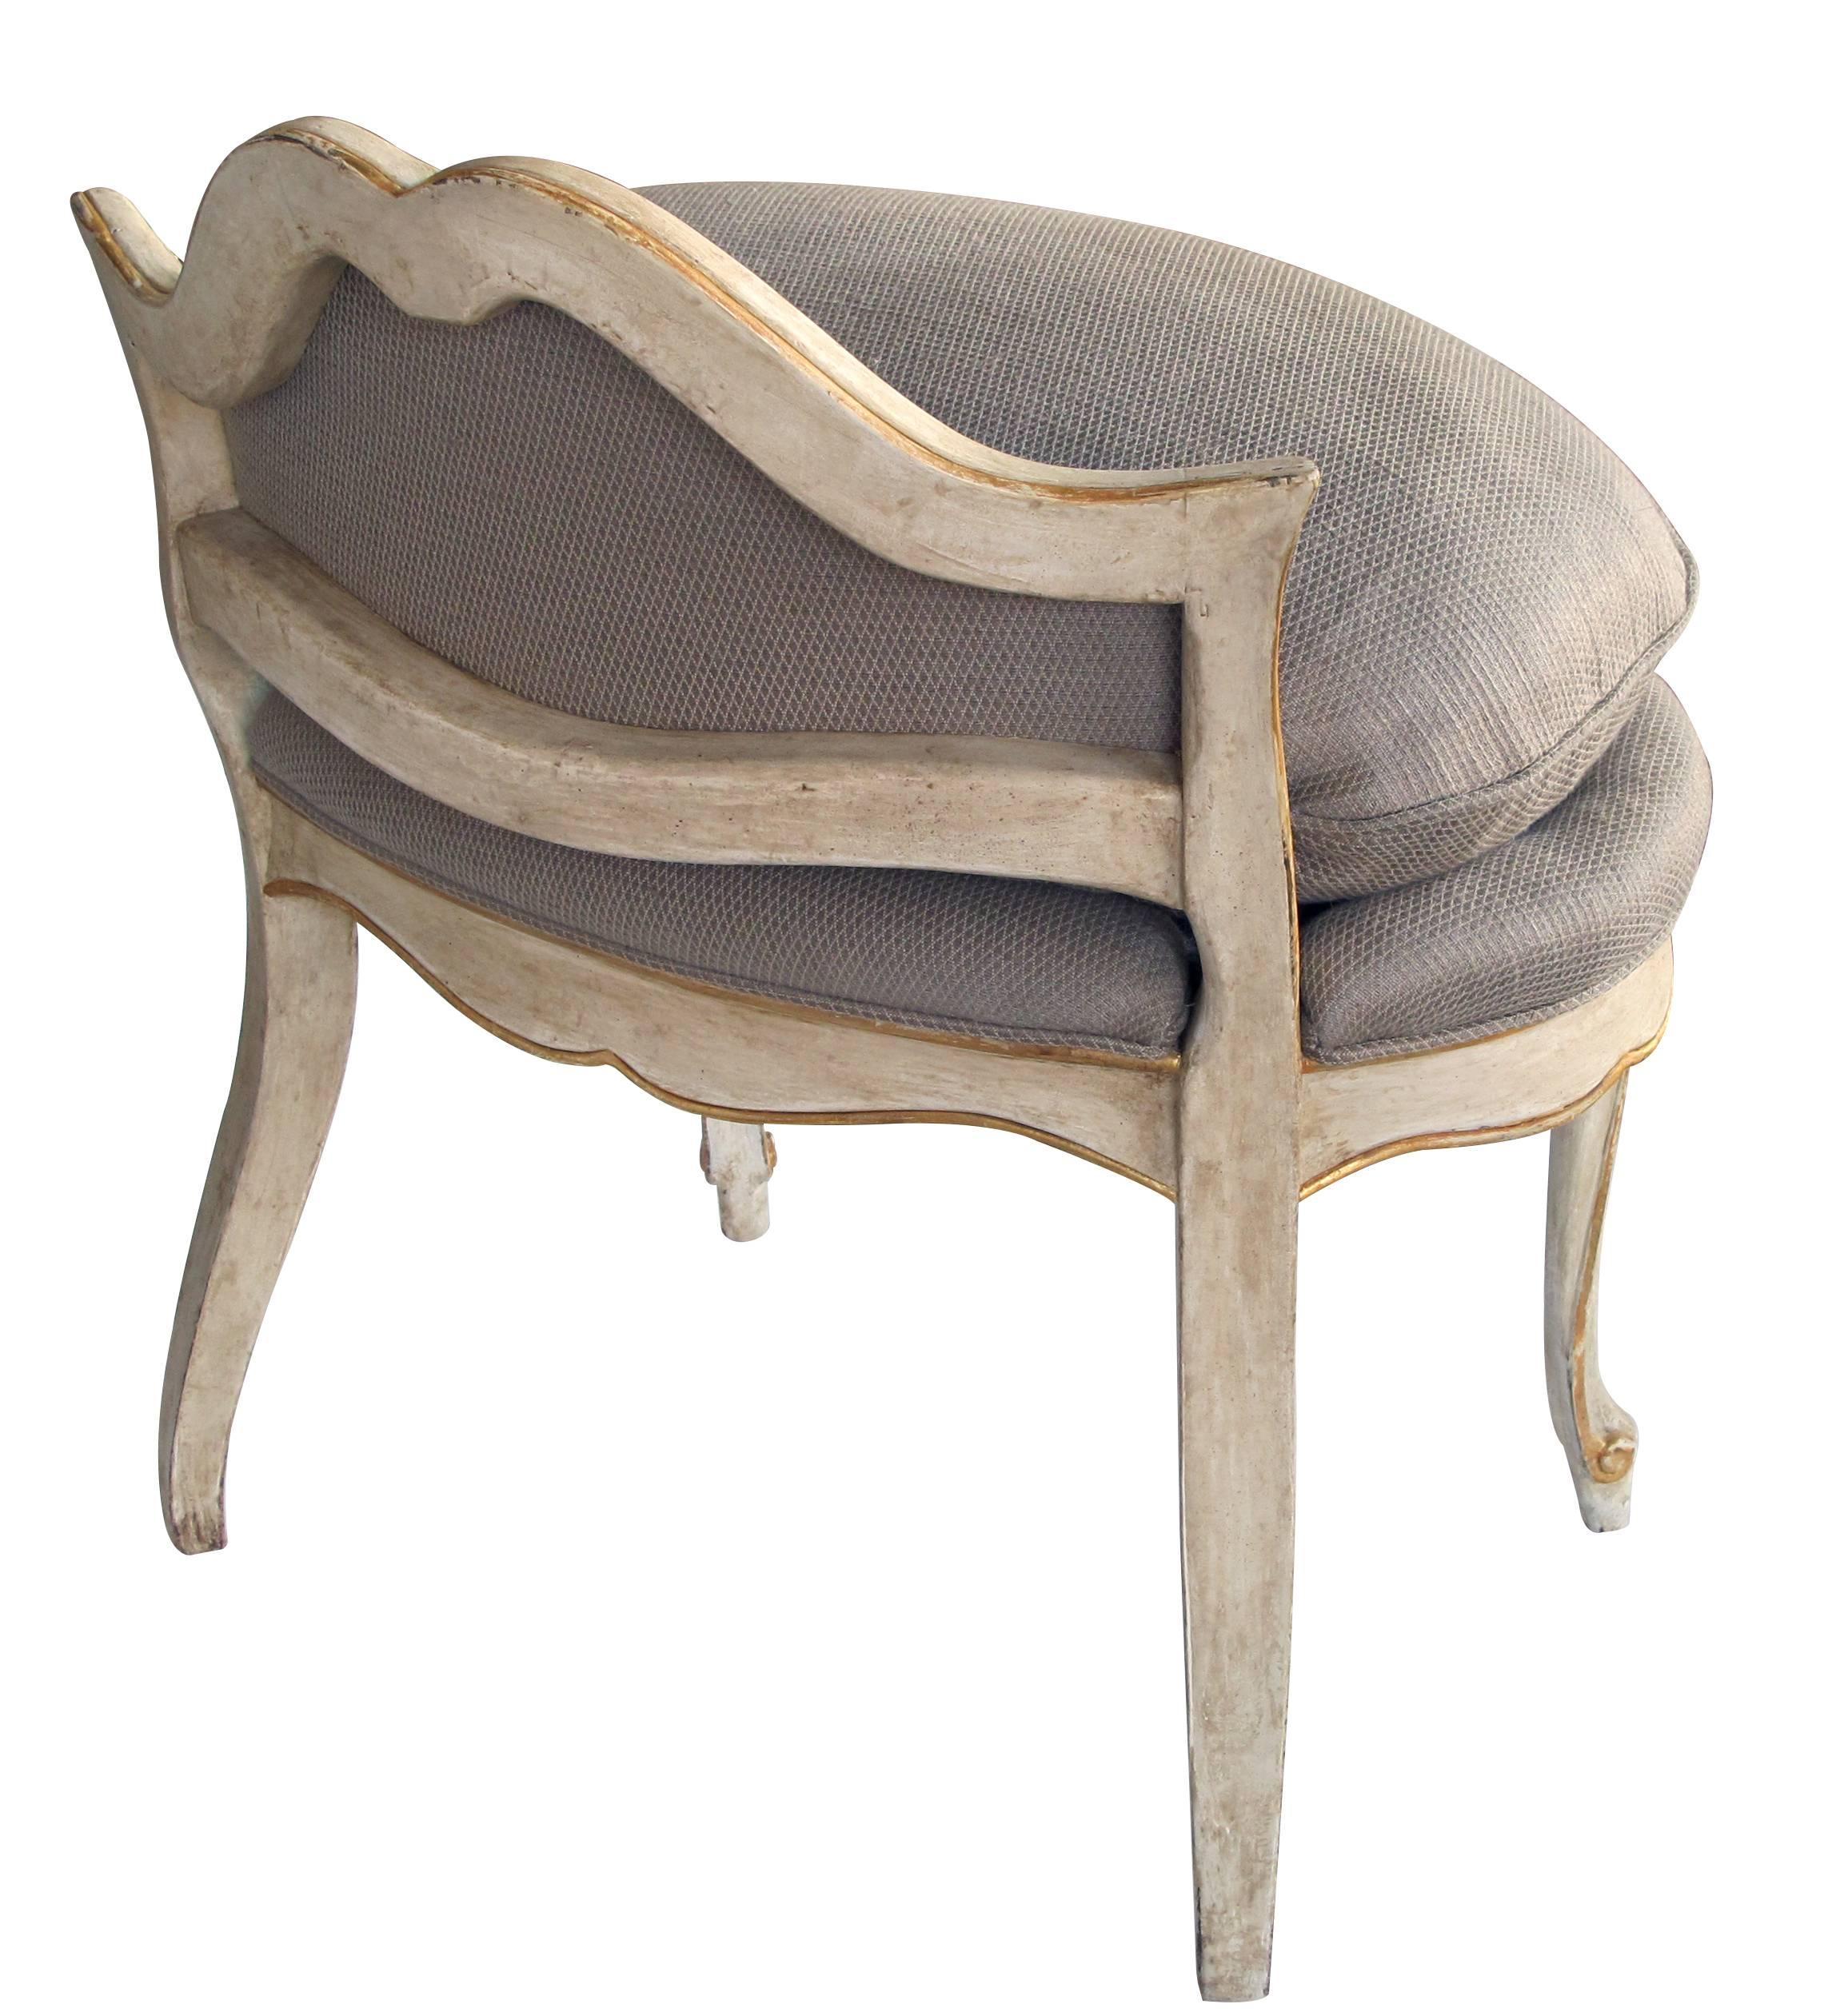 An elegant French Louis XV style ivory painted and parcel-gilt low back stool perfect for dressing room or end of a bed; with low shaped back above an oval padded seat raised on graceful cabriole supports.